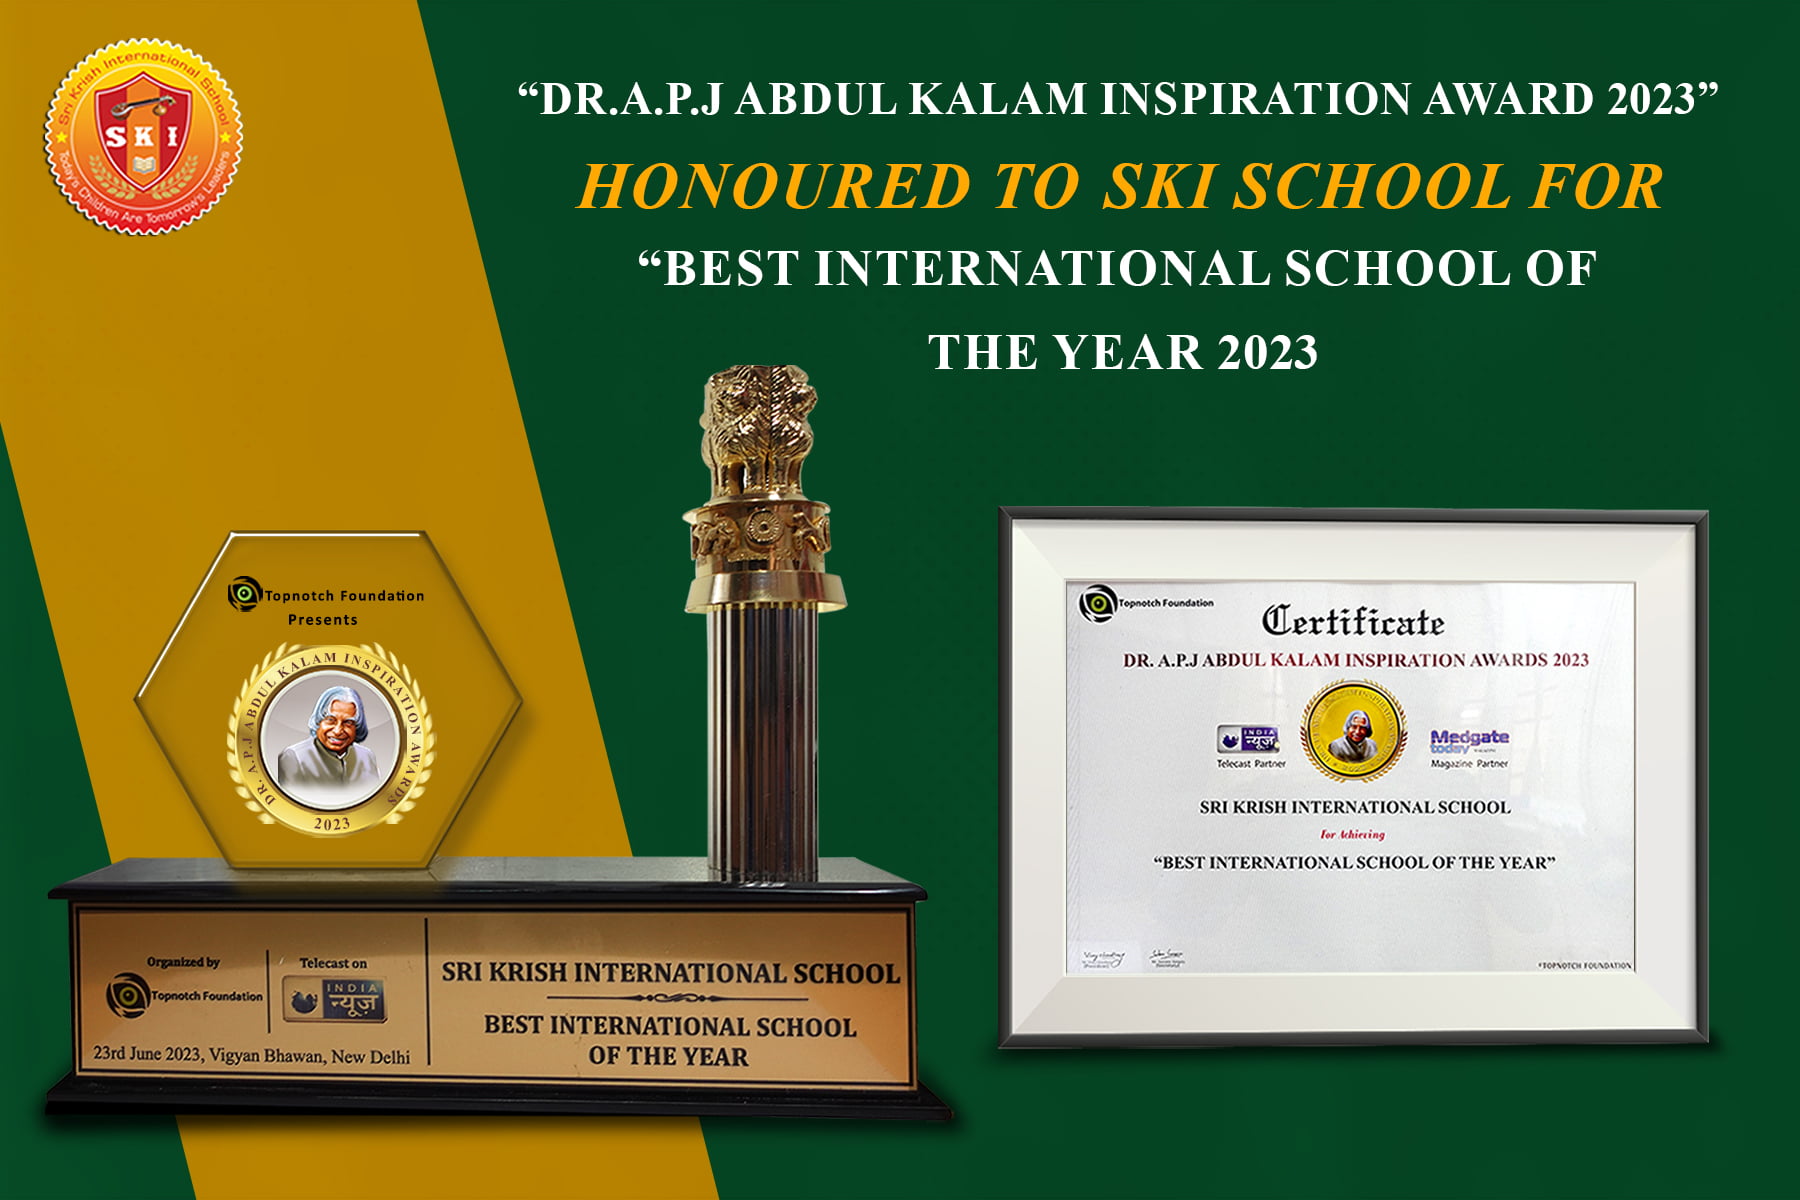 Best International School of the Year 2023 - Dr. A.P.J